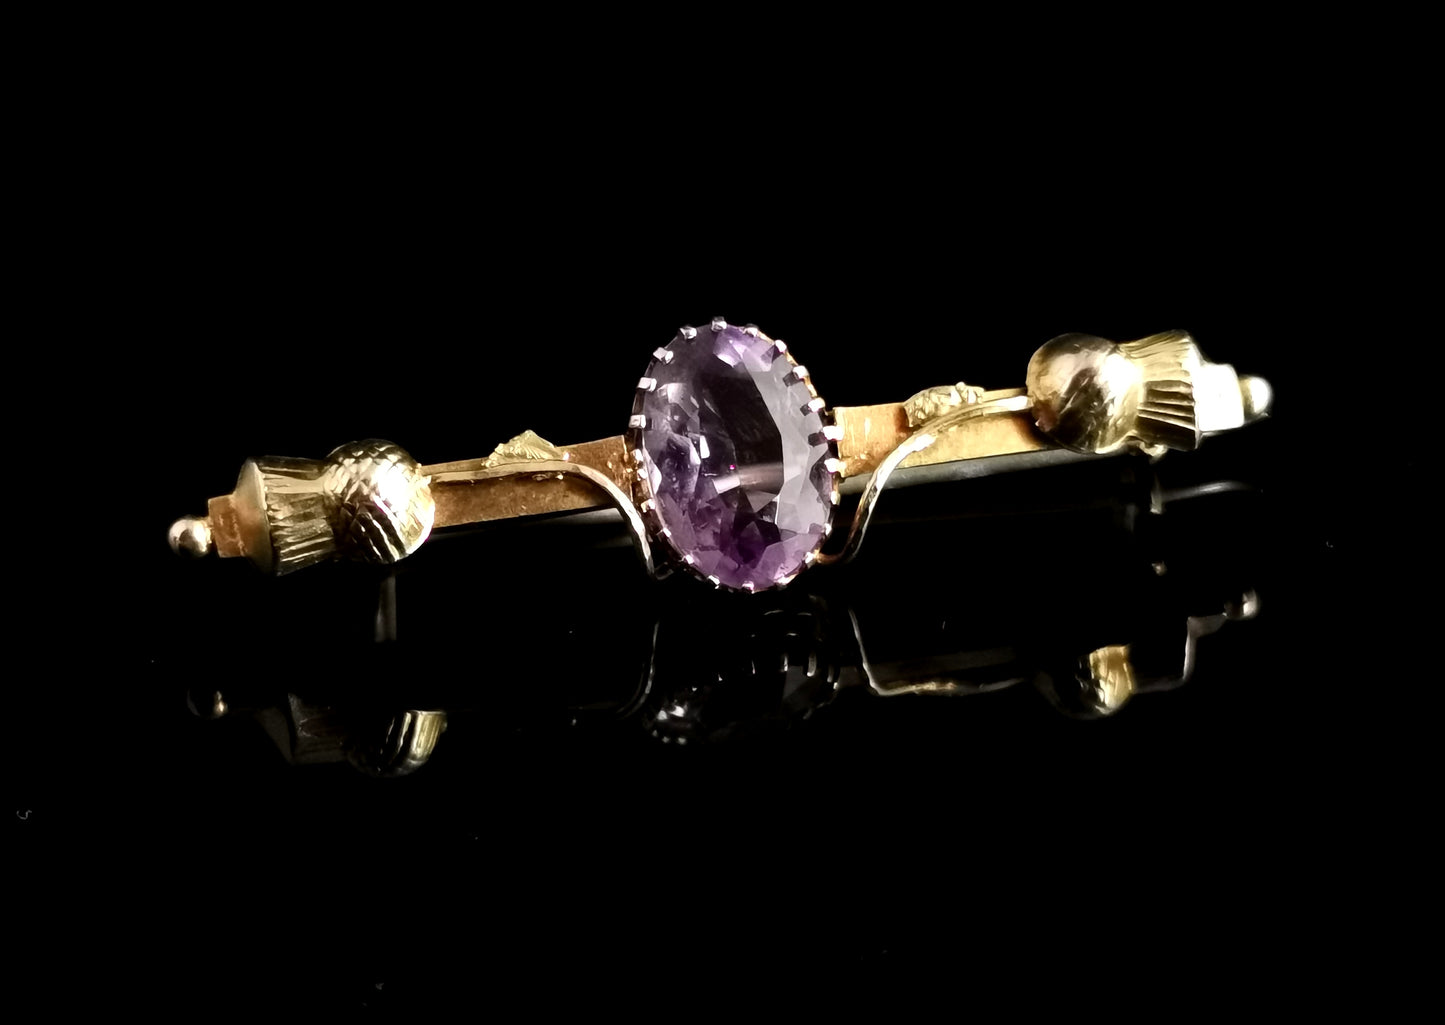 Antique Scottish thistle brooch, Amethyst and 9ct gold